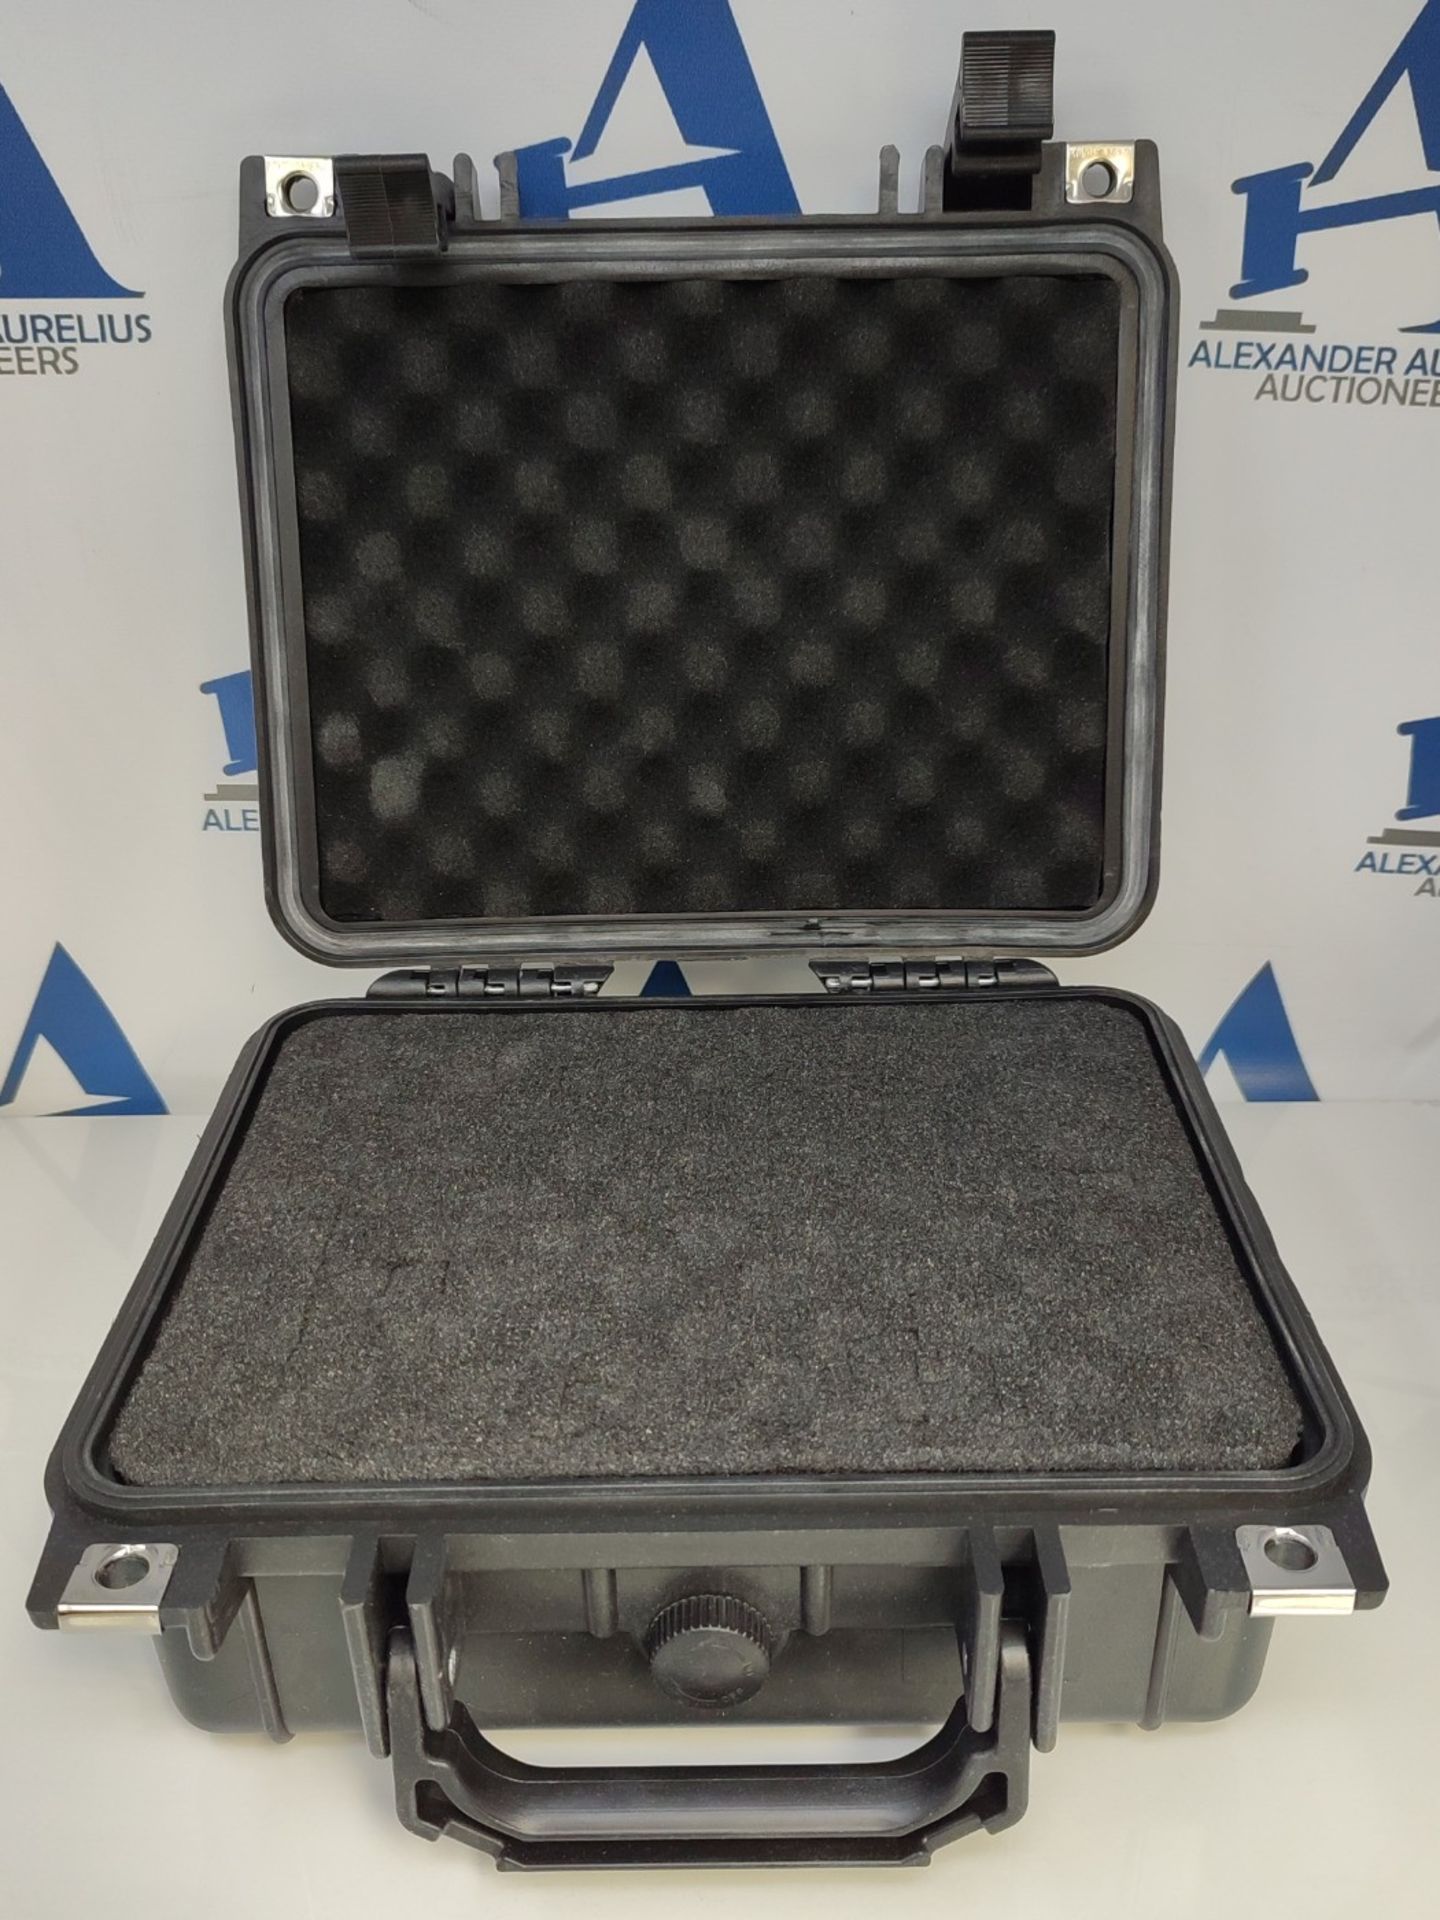 HMF ODK100 Outdoor Photo Case, Transport Case with Grid Foam | 27 x 24.5 x 13 cm - Image 2 of 4